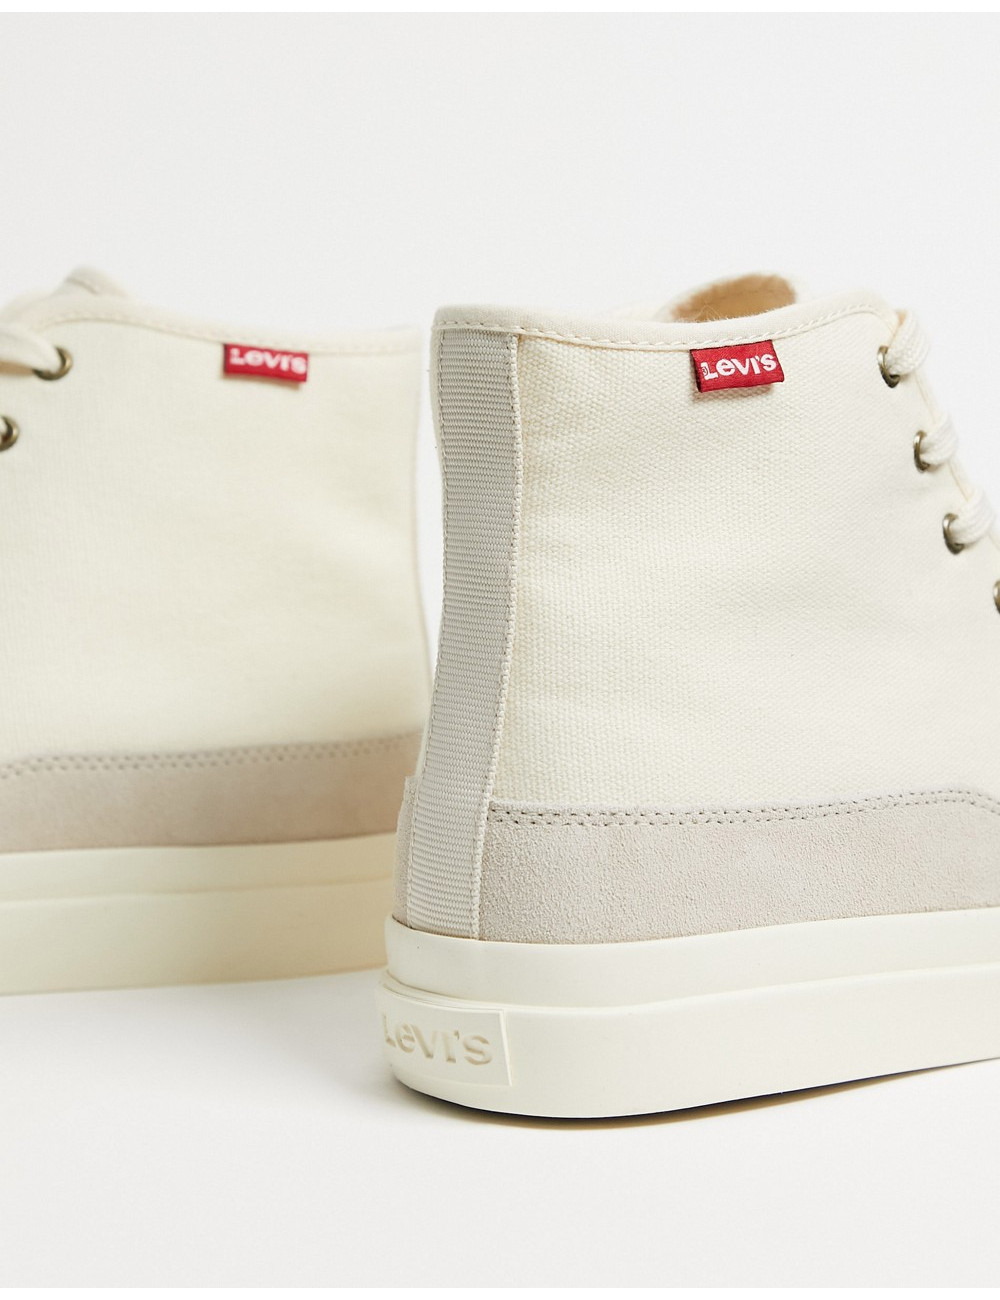 Levi's square high top...